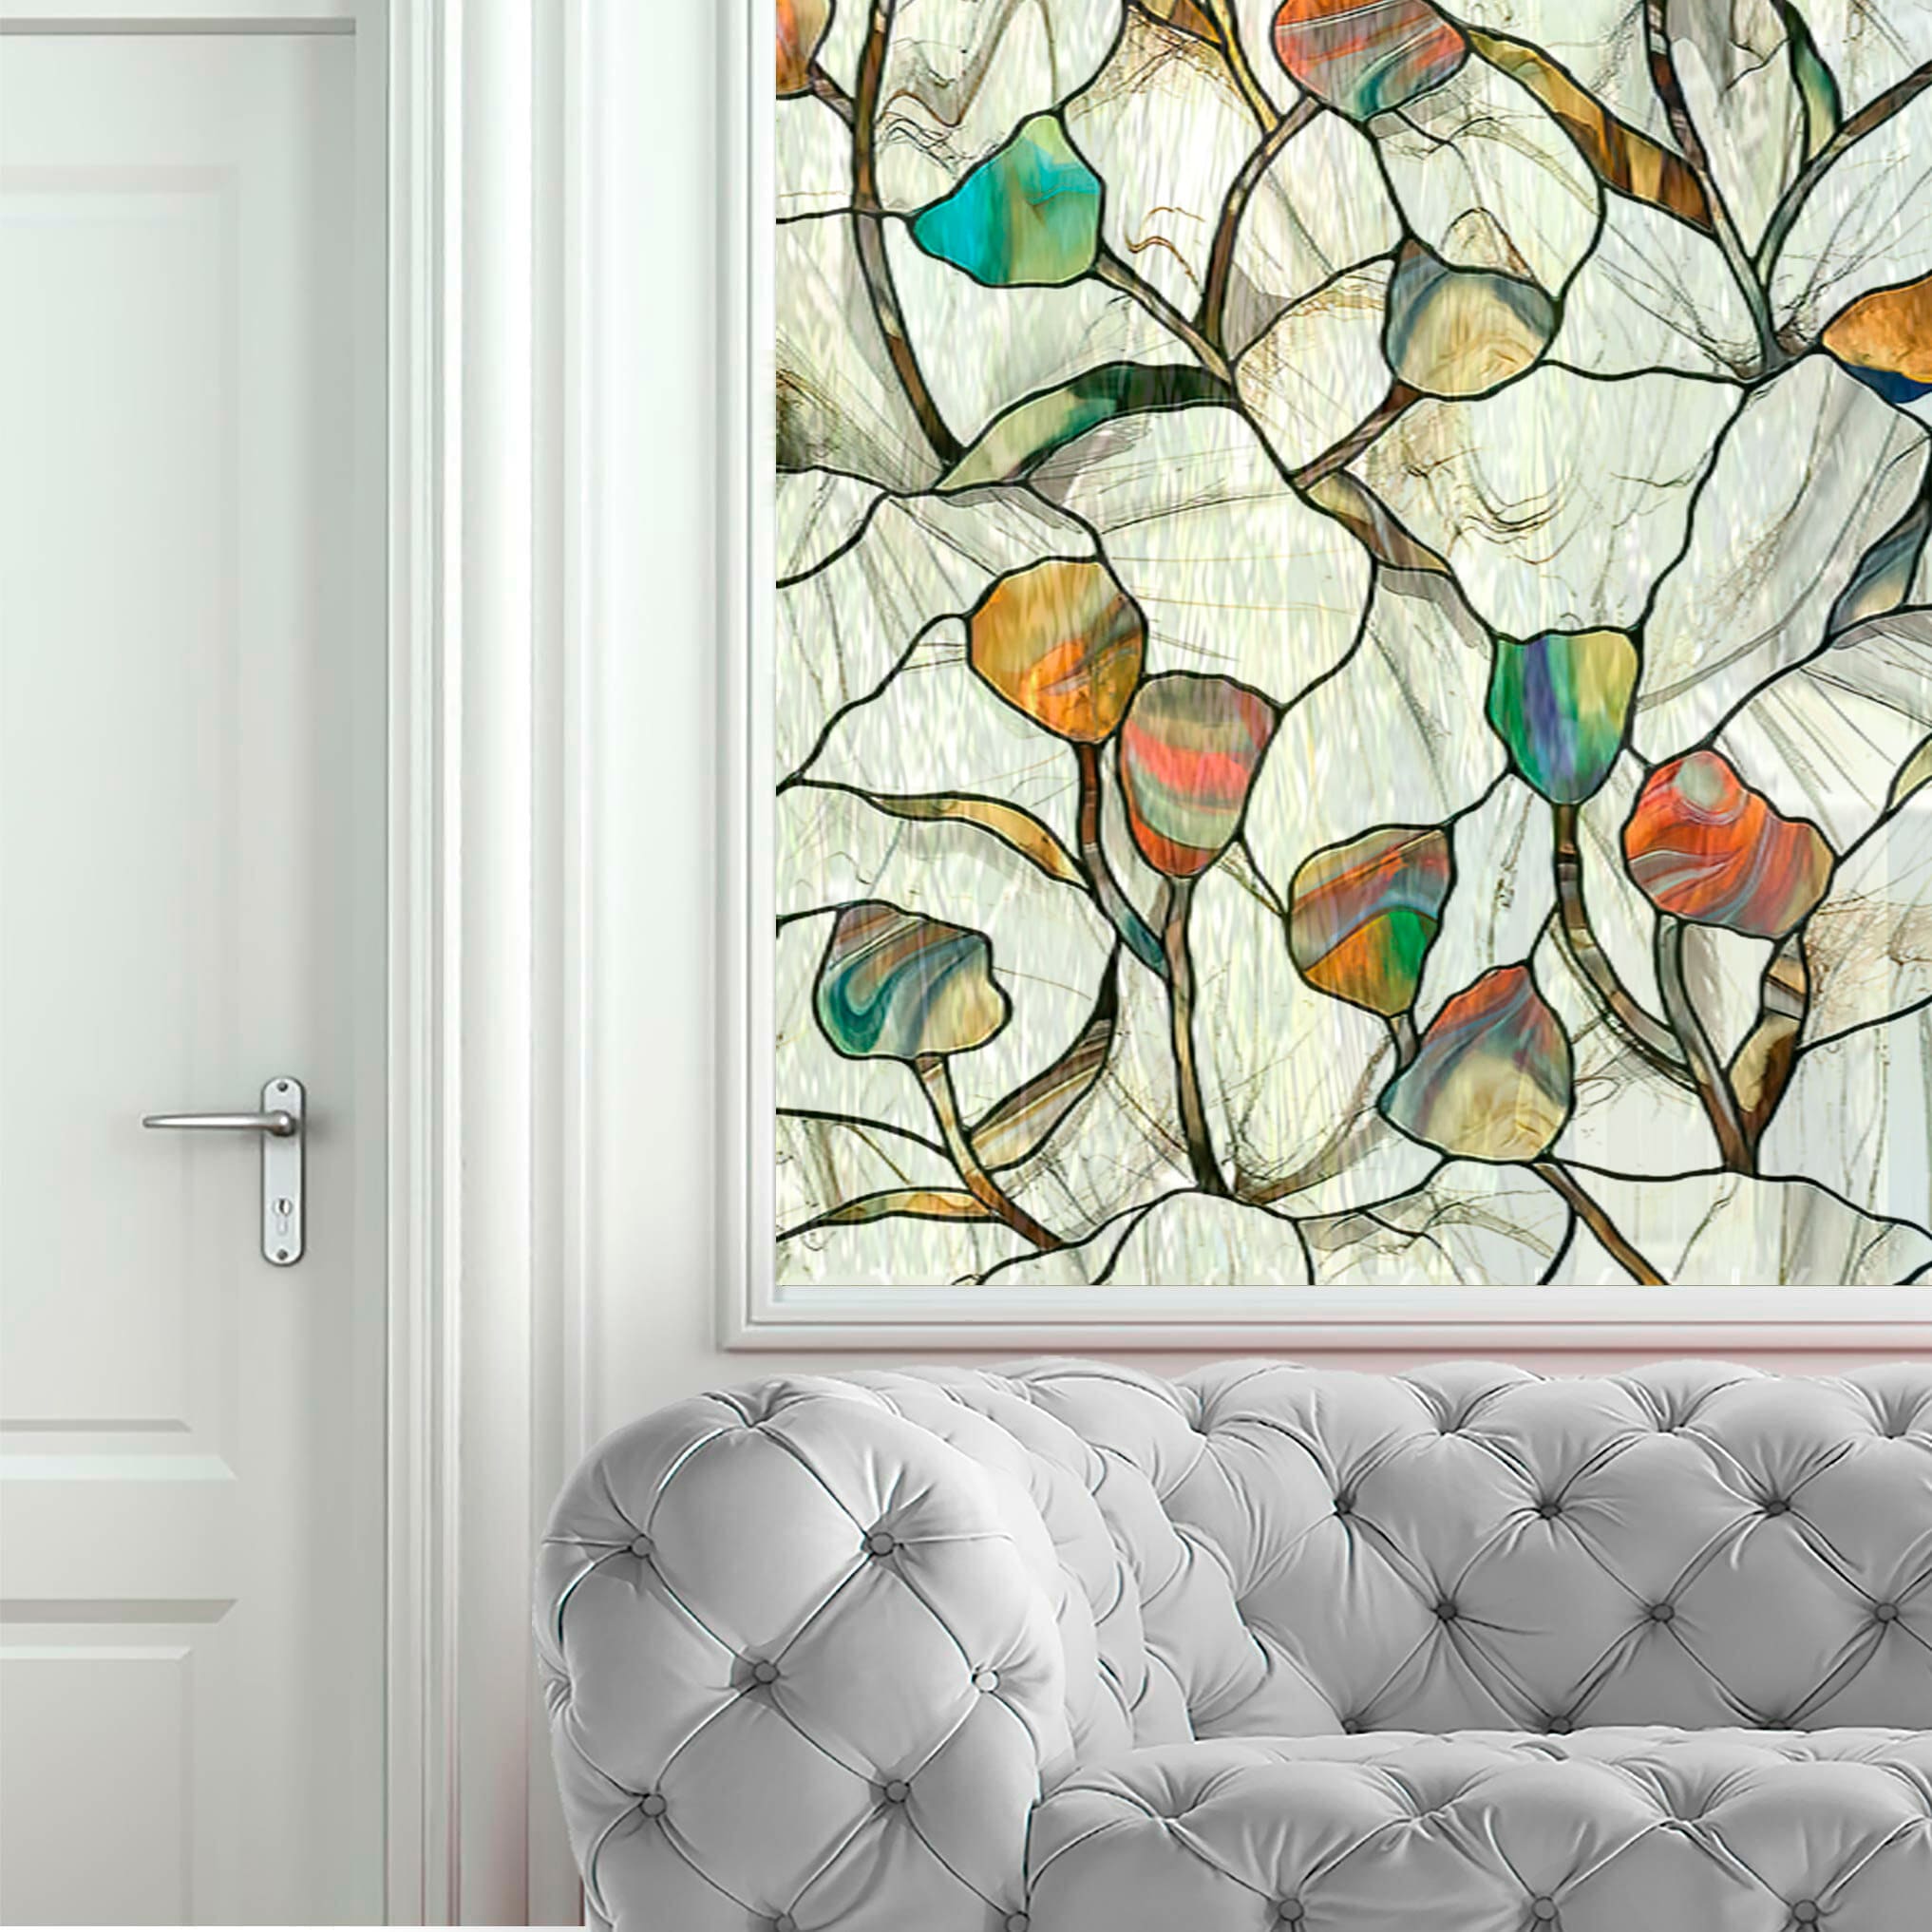 Design Toscano Hyde Street Tiffany-style Stained Glass Window : Target